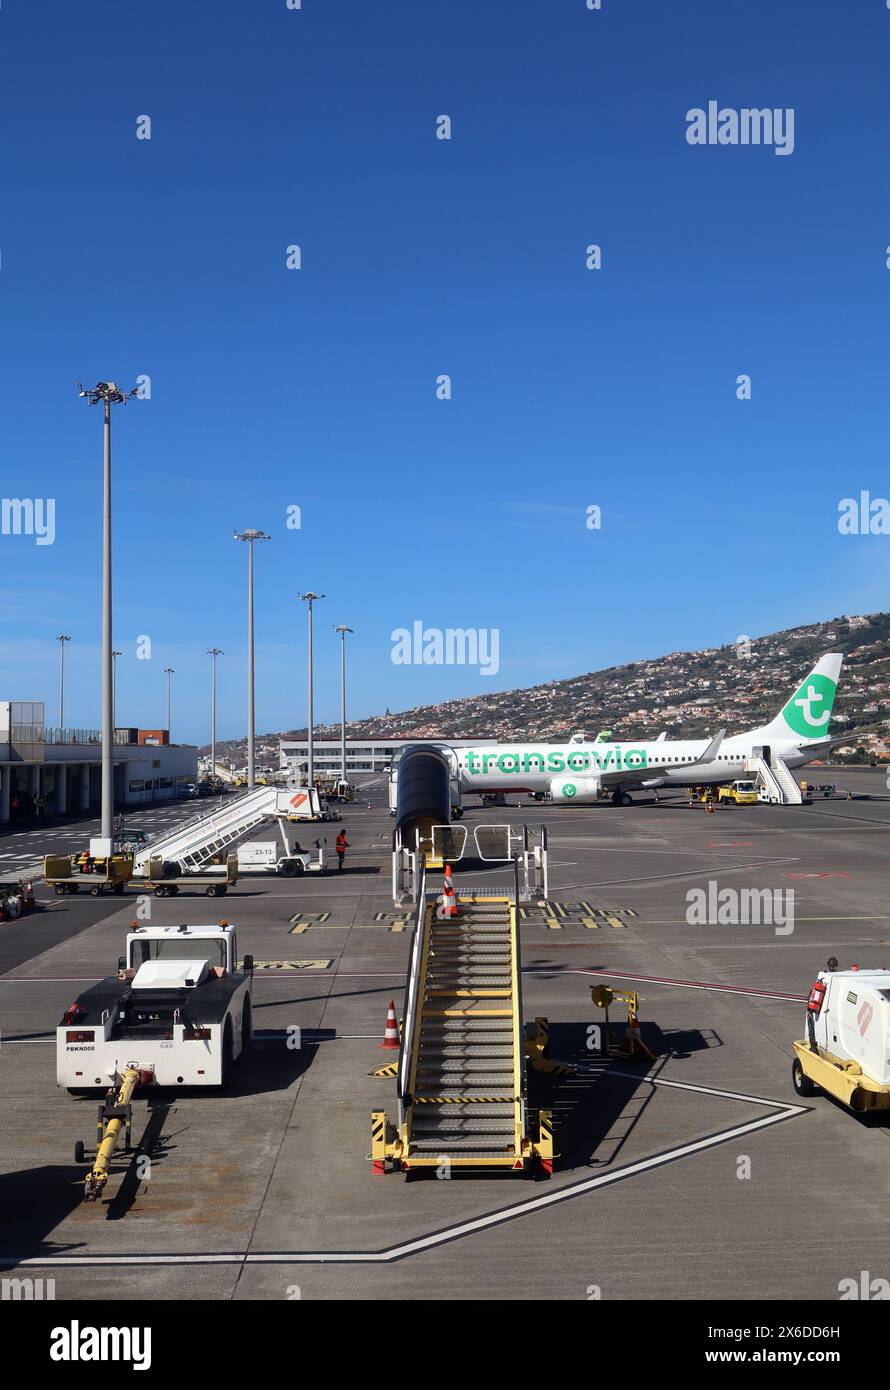 Transavai Boeing 737-8K2 on apron by terminal building Cristiano Ronaldo International airport, Madeira on 3rd May 2024 and assorted airport equipment. Stock Photo